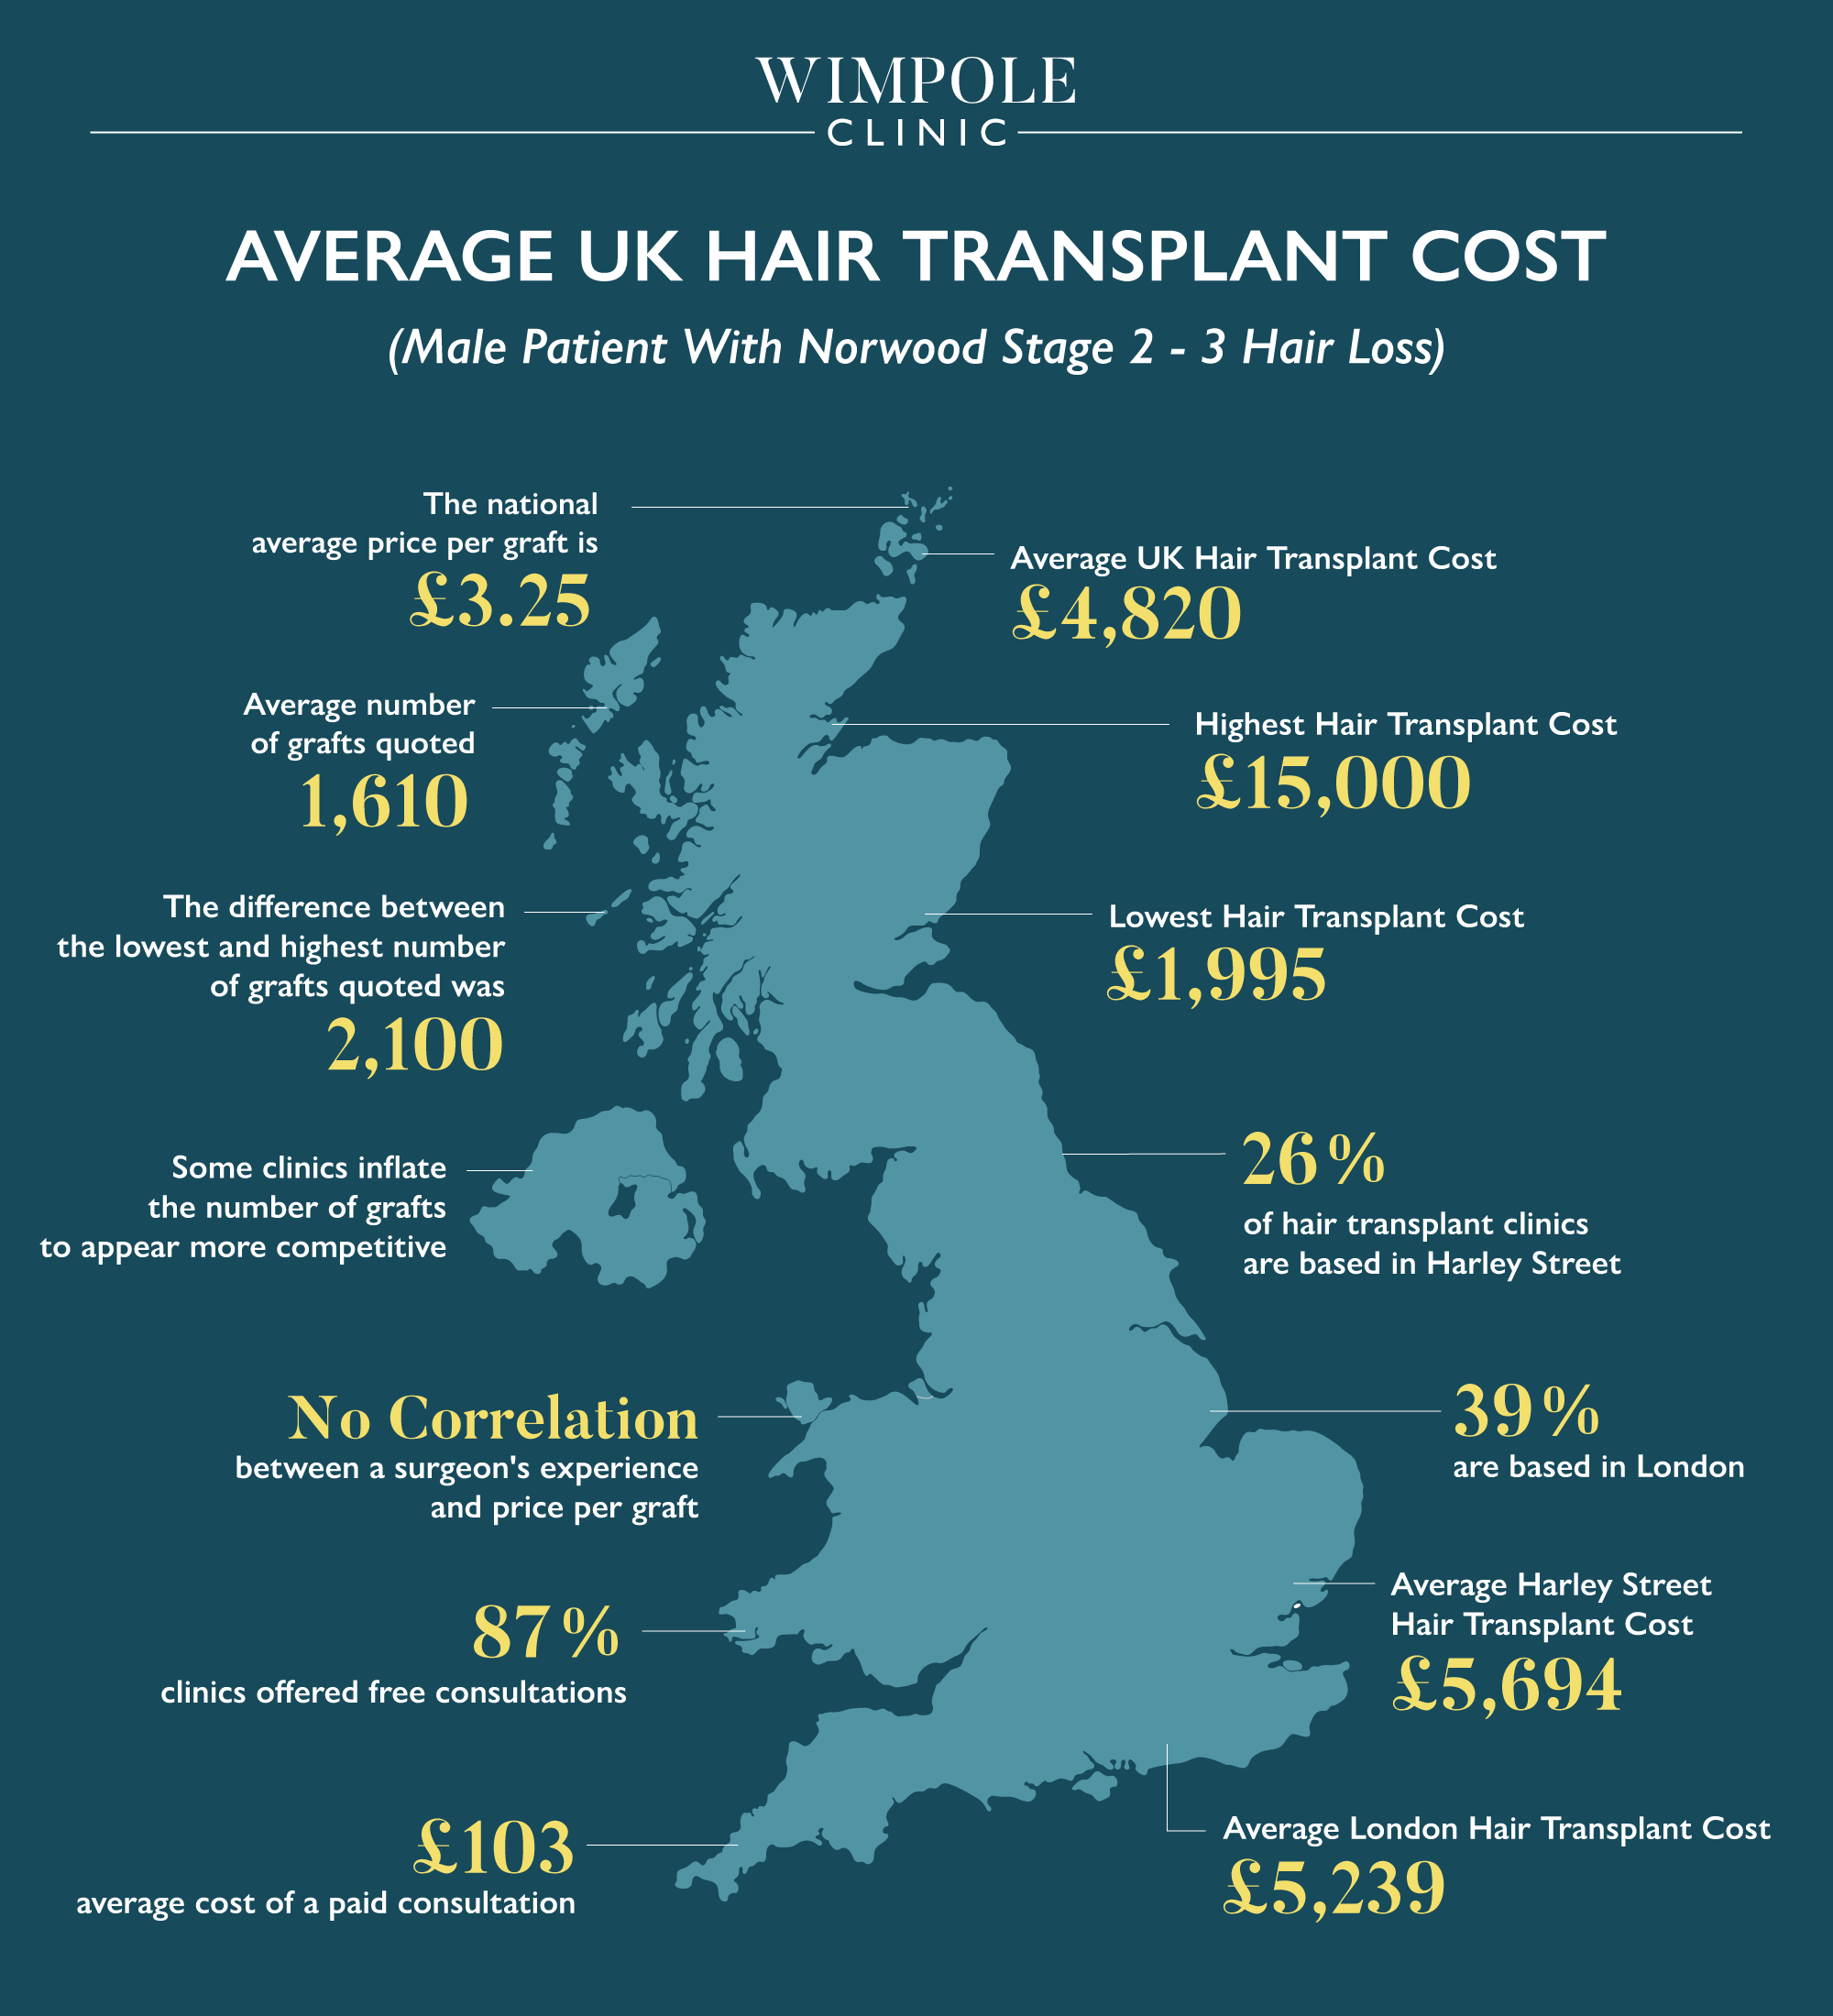 UK Hair Transplants Cost Analysis: Choosing the Right Clinic In 2023, Wimpole Clinic